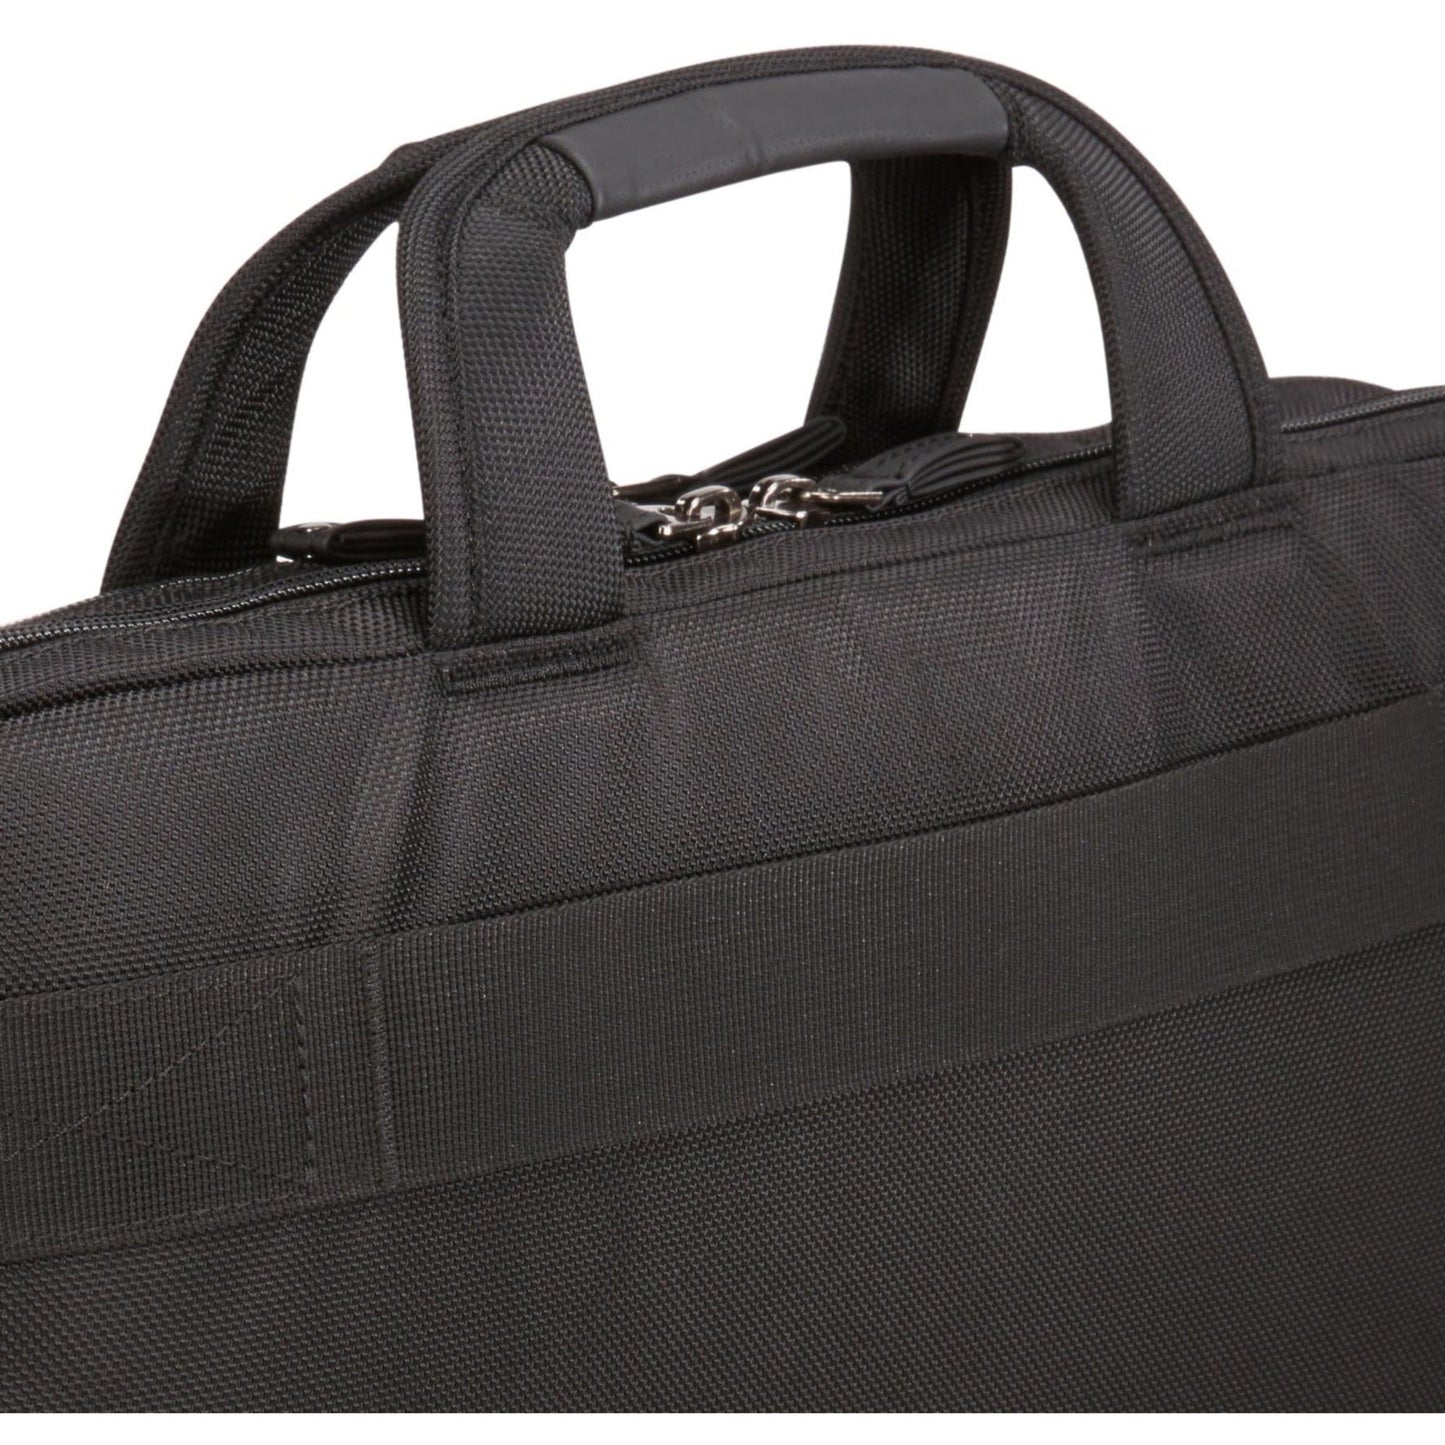 Case Logic NOTIA-116 Carrying Case (Briefcase) for 15.6" Notebook - Black